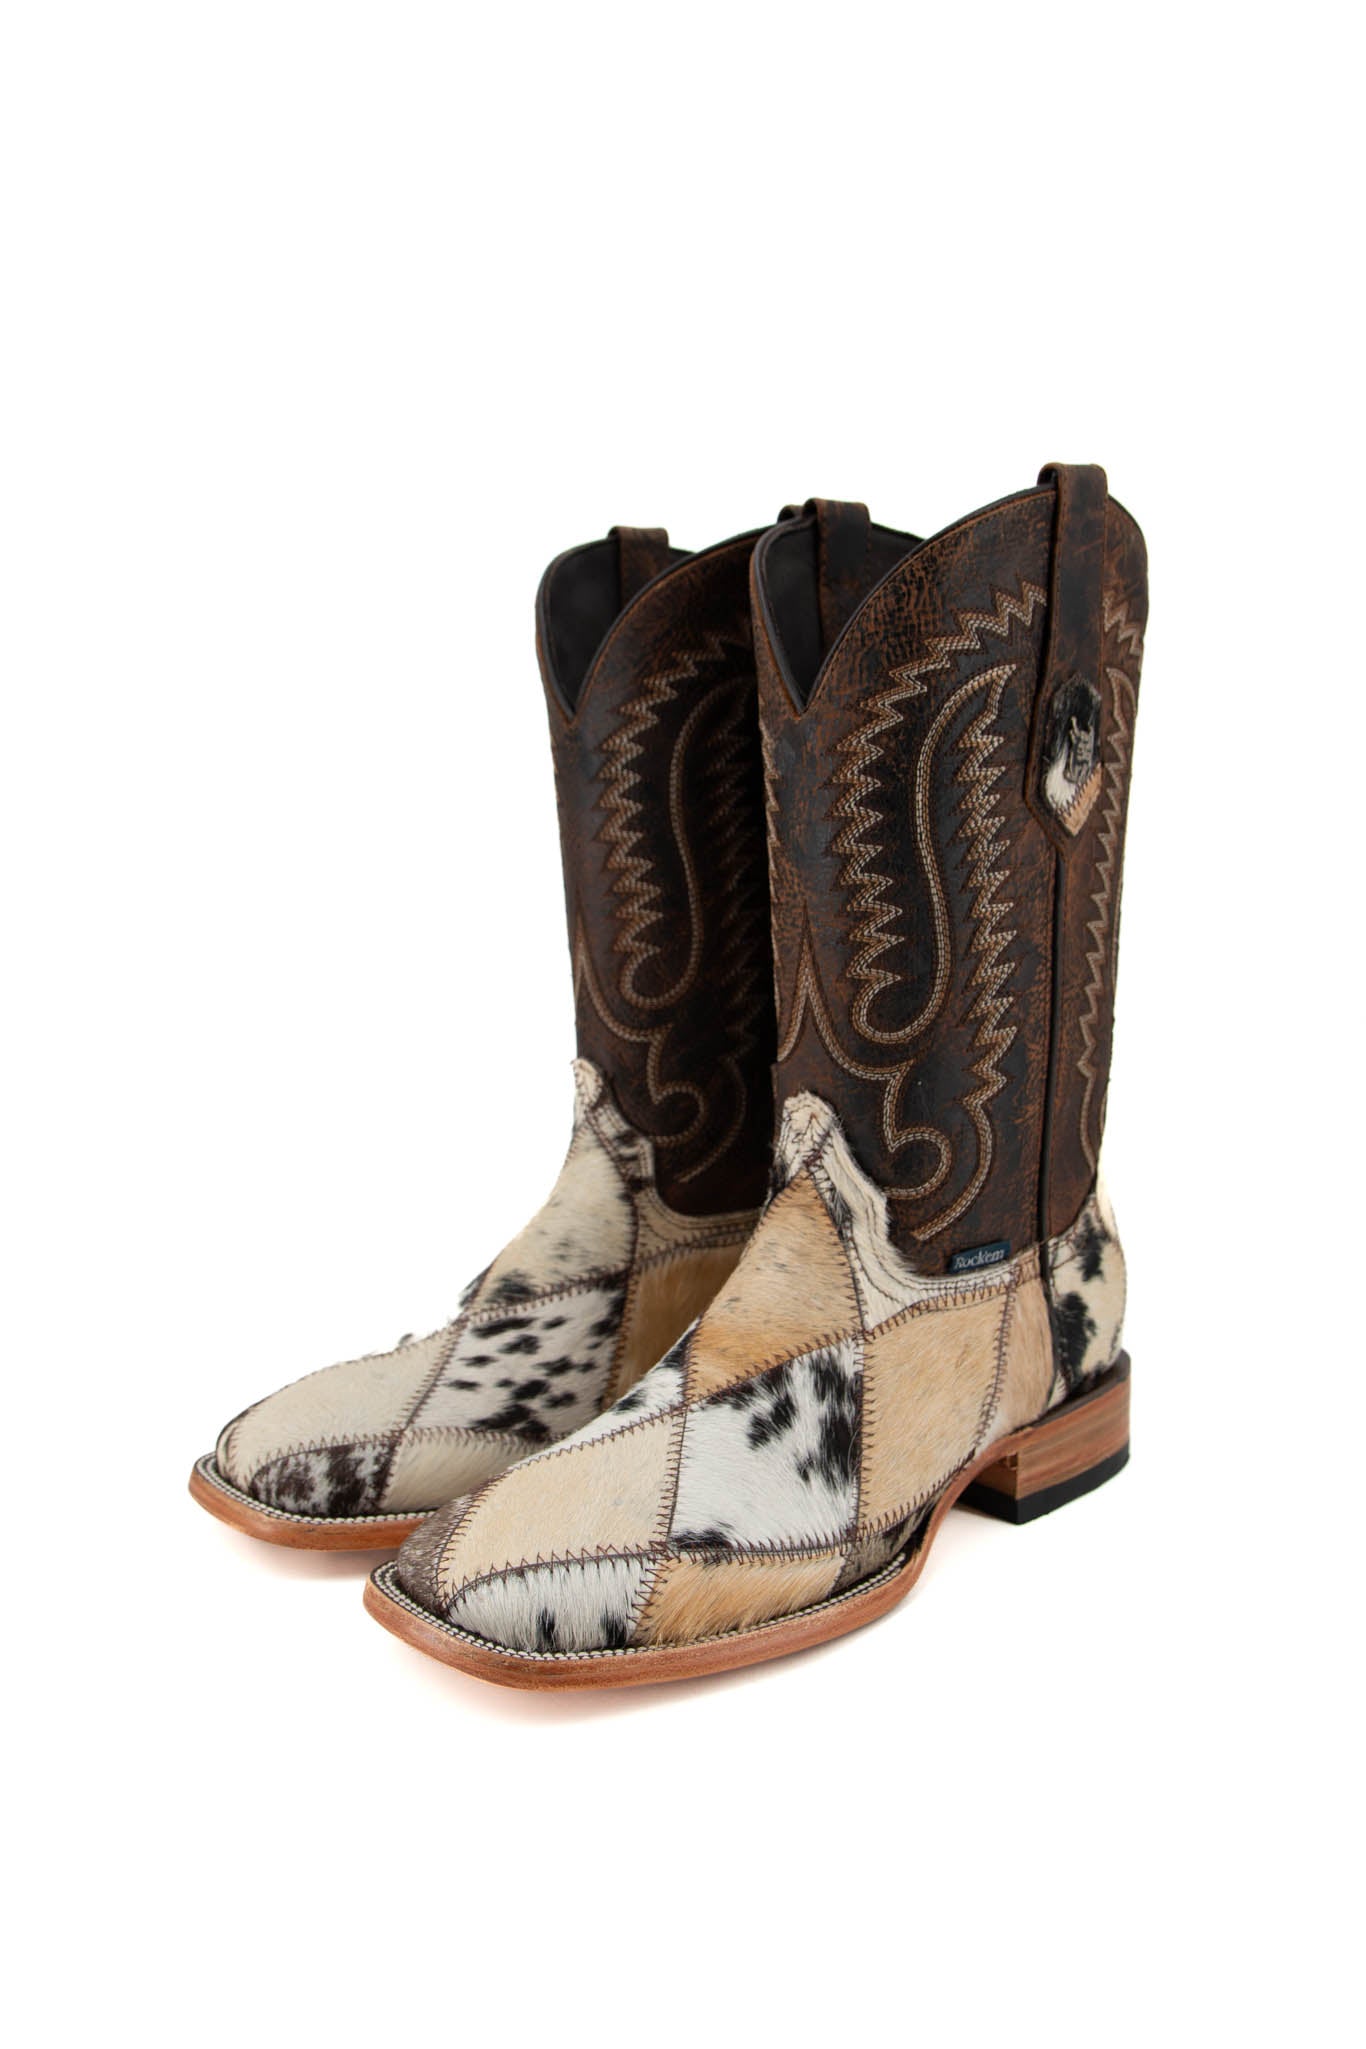 Men's Cowhide Patchwork Square Toe Cowboy Boot Size 8 Box 1K **AS SEEN ON IMAGE**